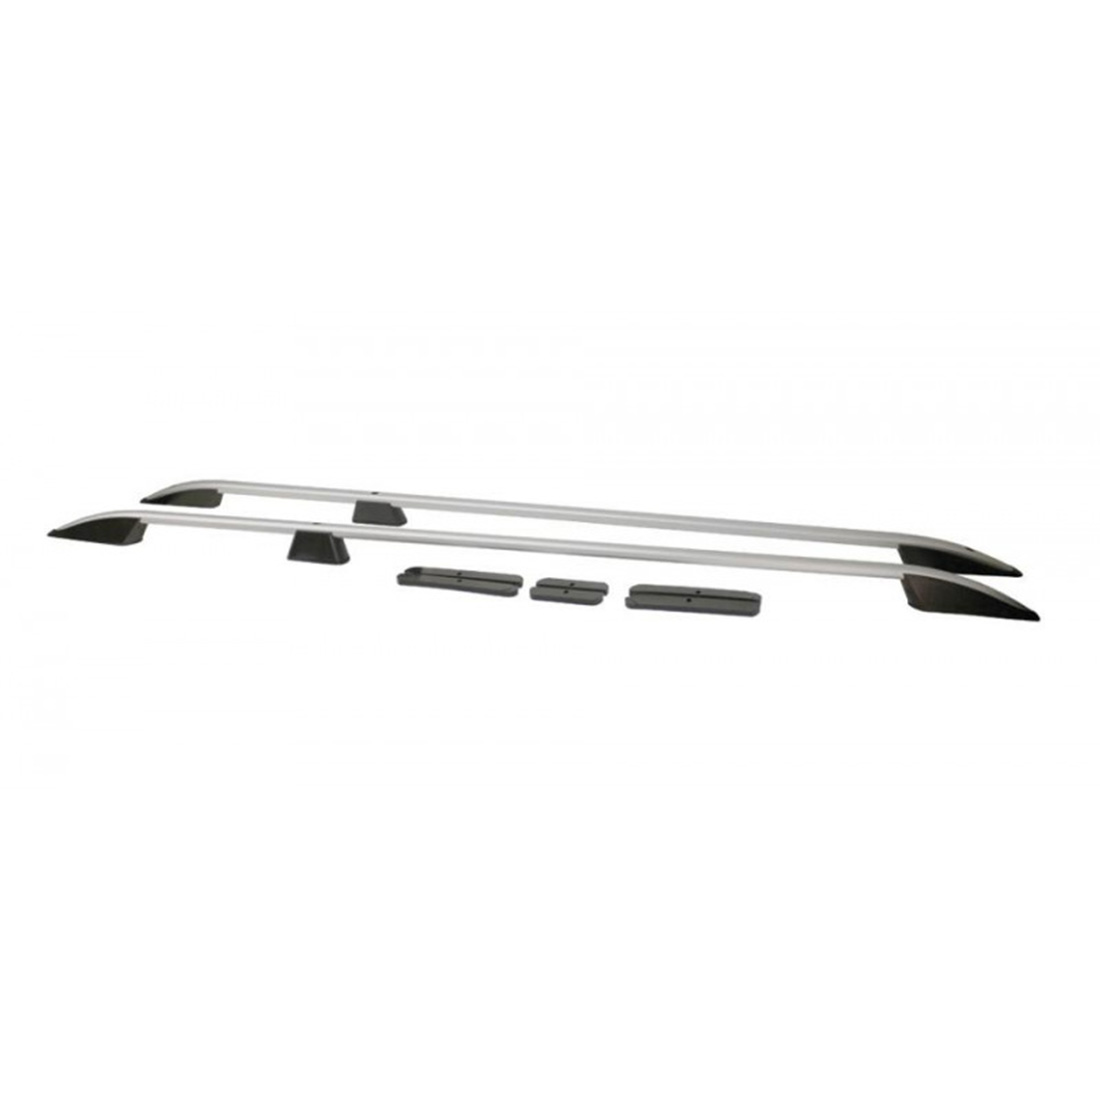 VW T5 and T6 aluminum roof rail set for sale.